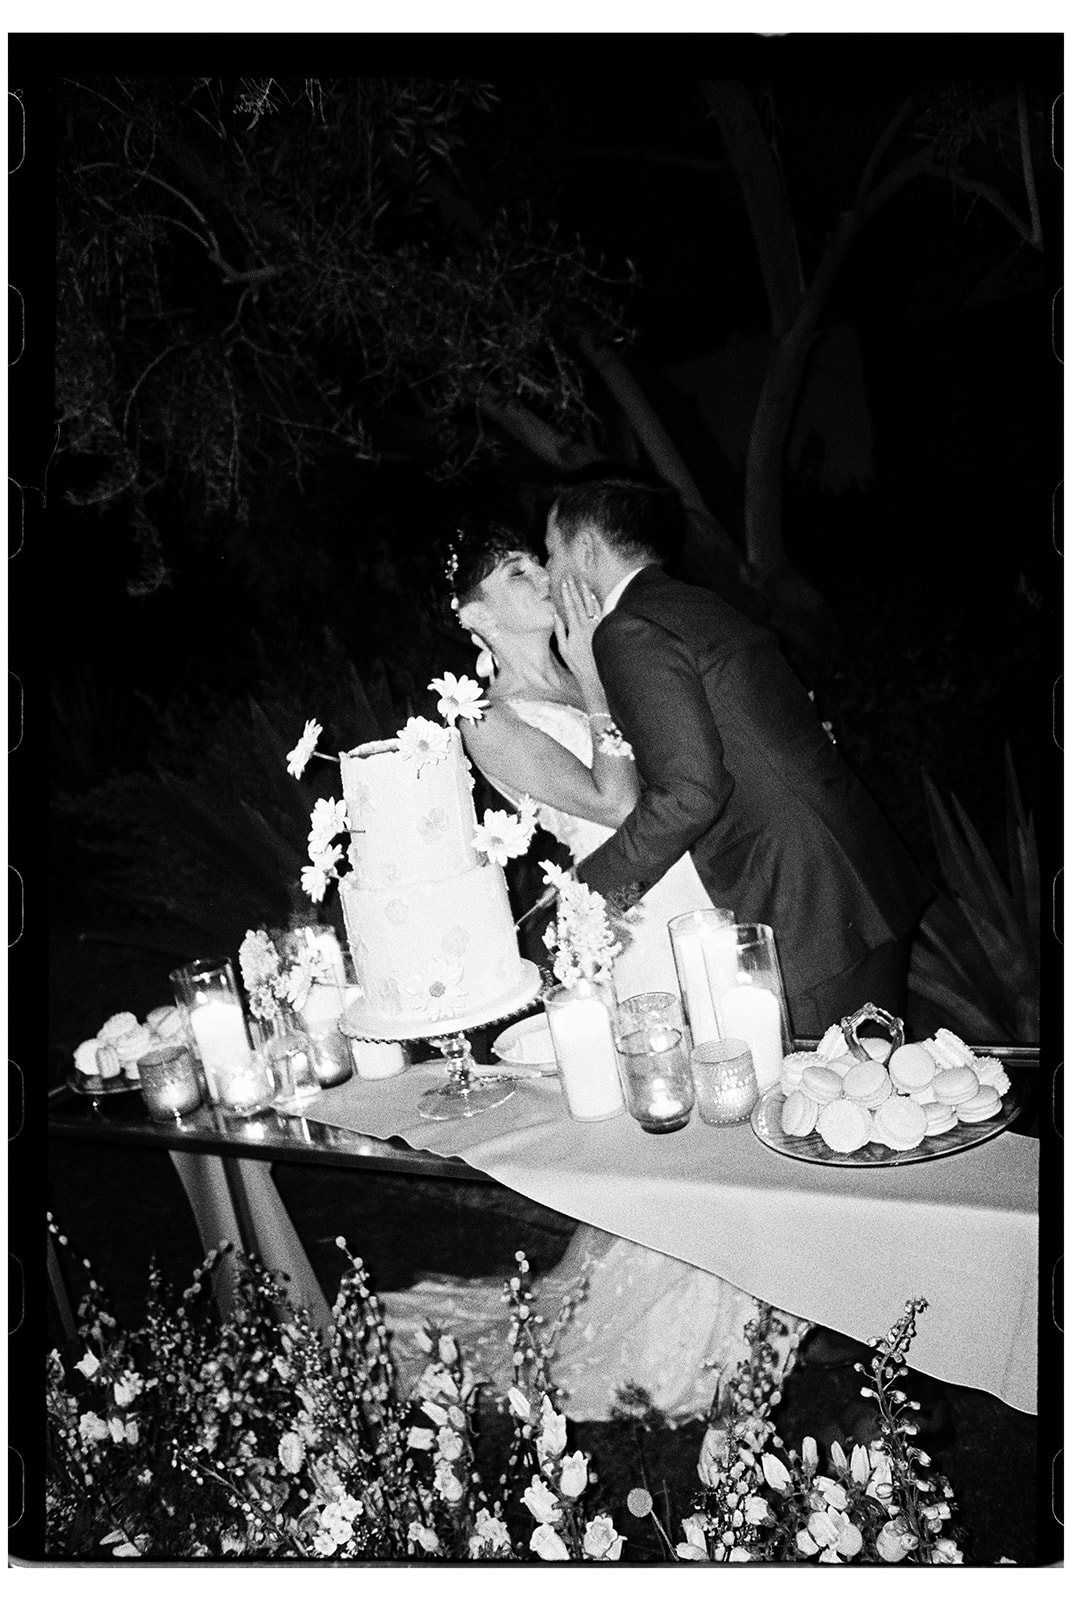 A bride and groom playfully feeding each other cake at their wedding reception, surrounded by candles and decorations.